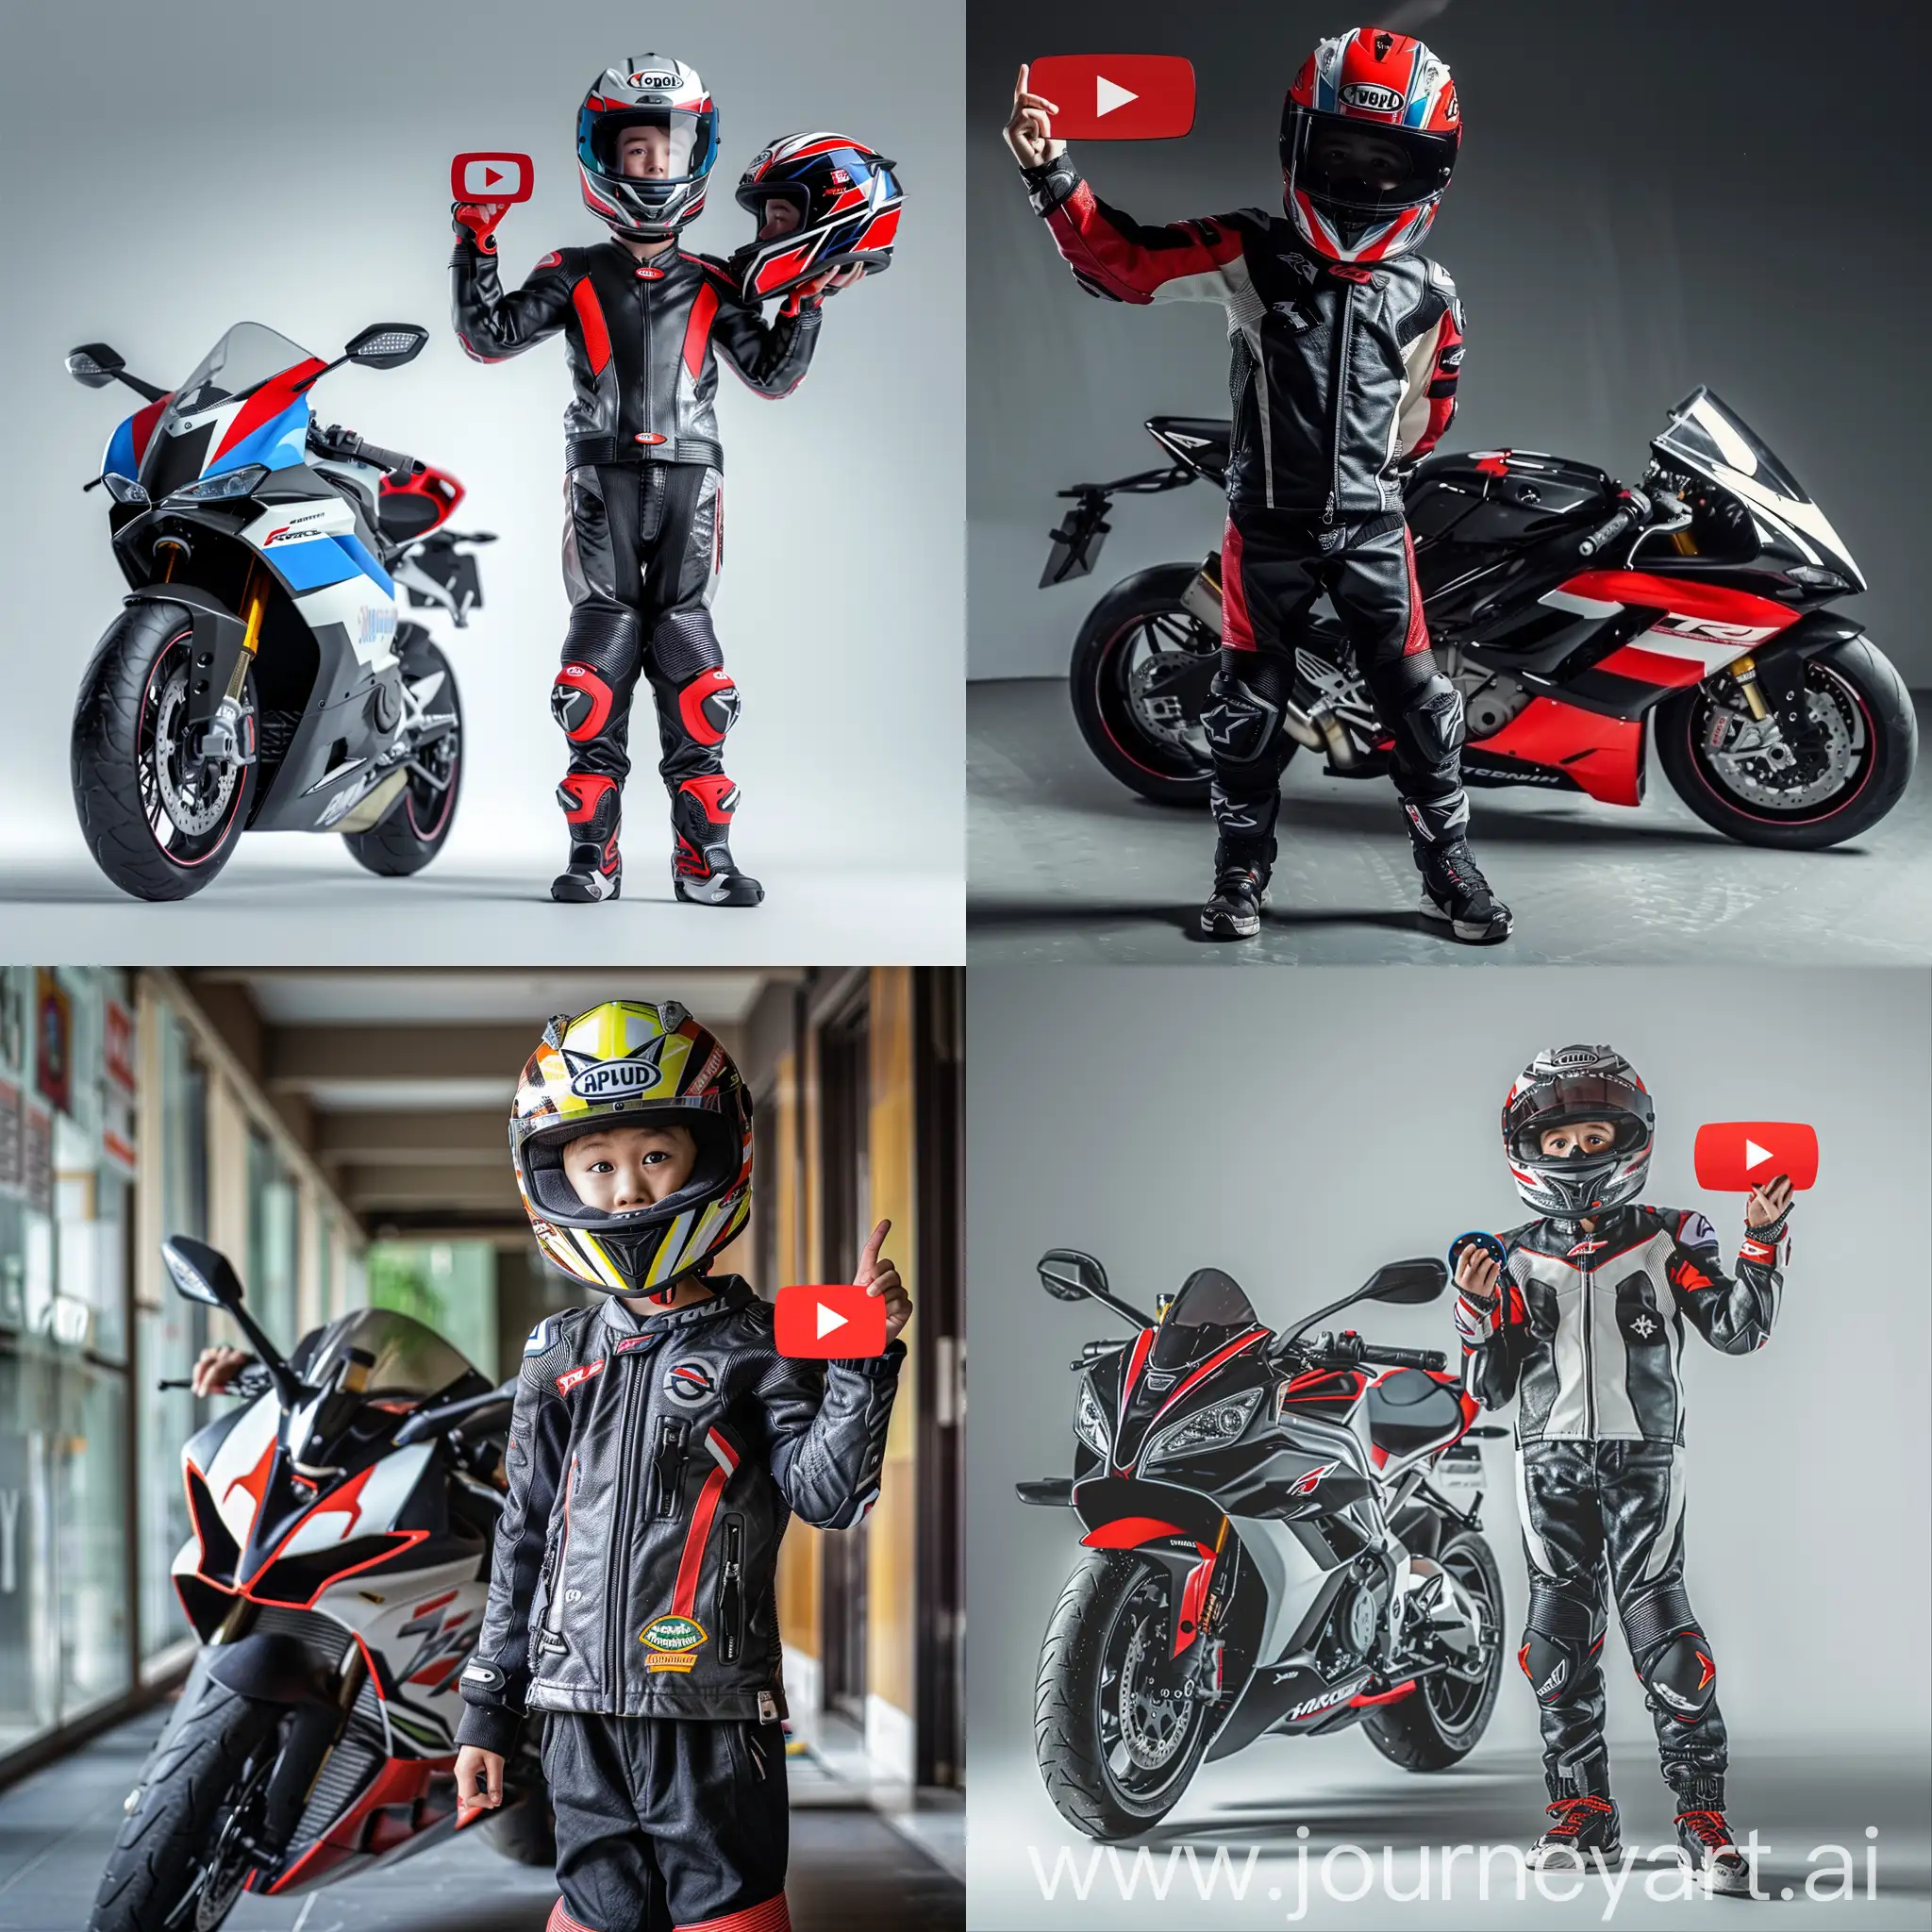 A boy standing beside a superbike and holding YouTube playbutton in his right hand and wearing a premium racing helmet